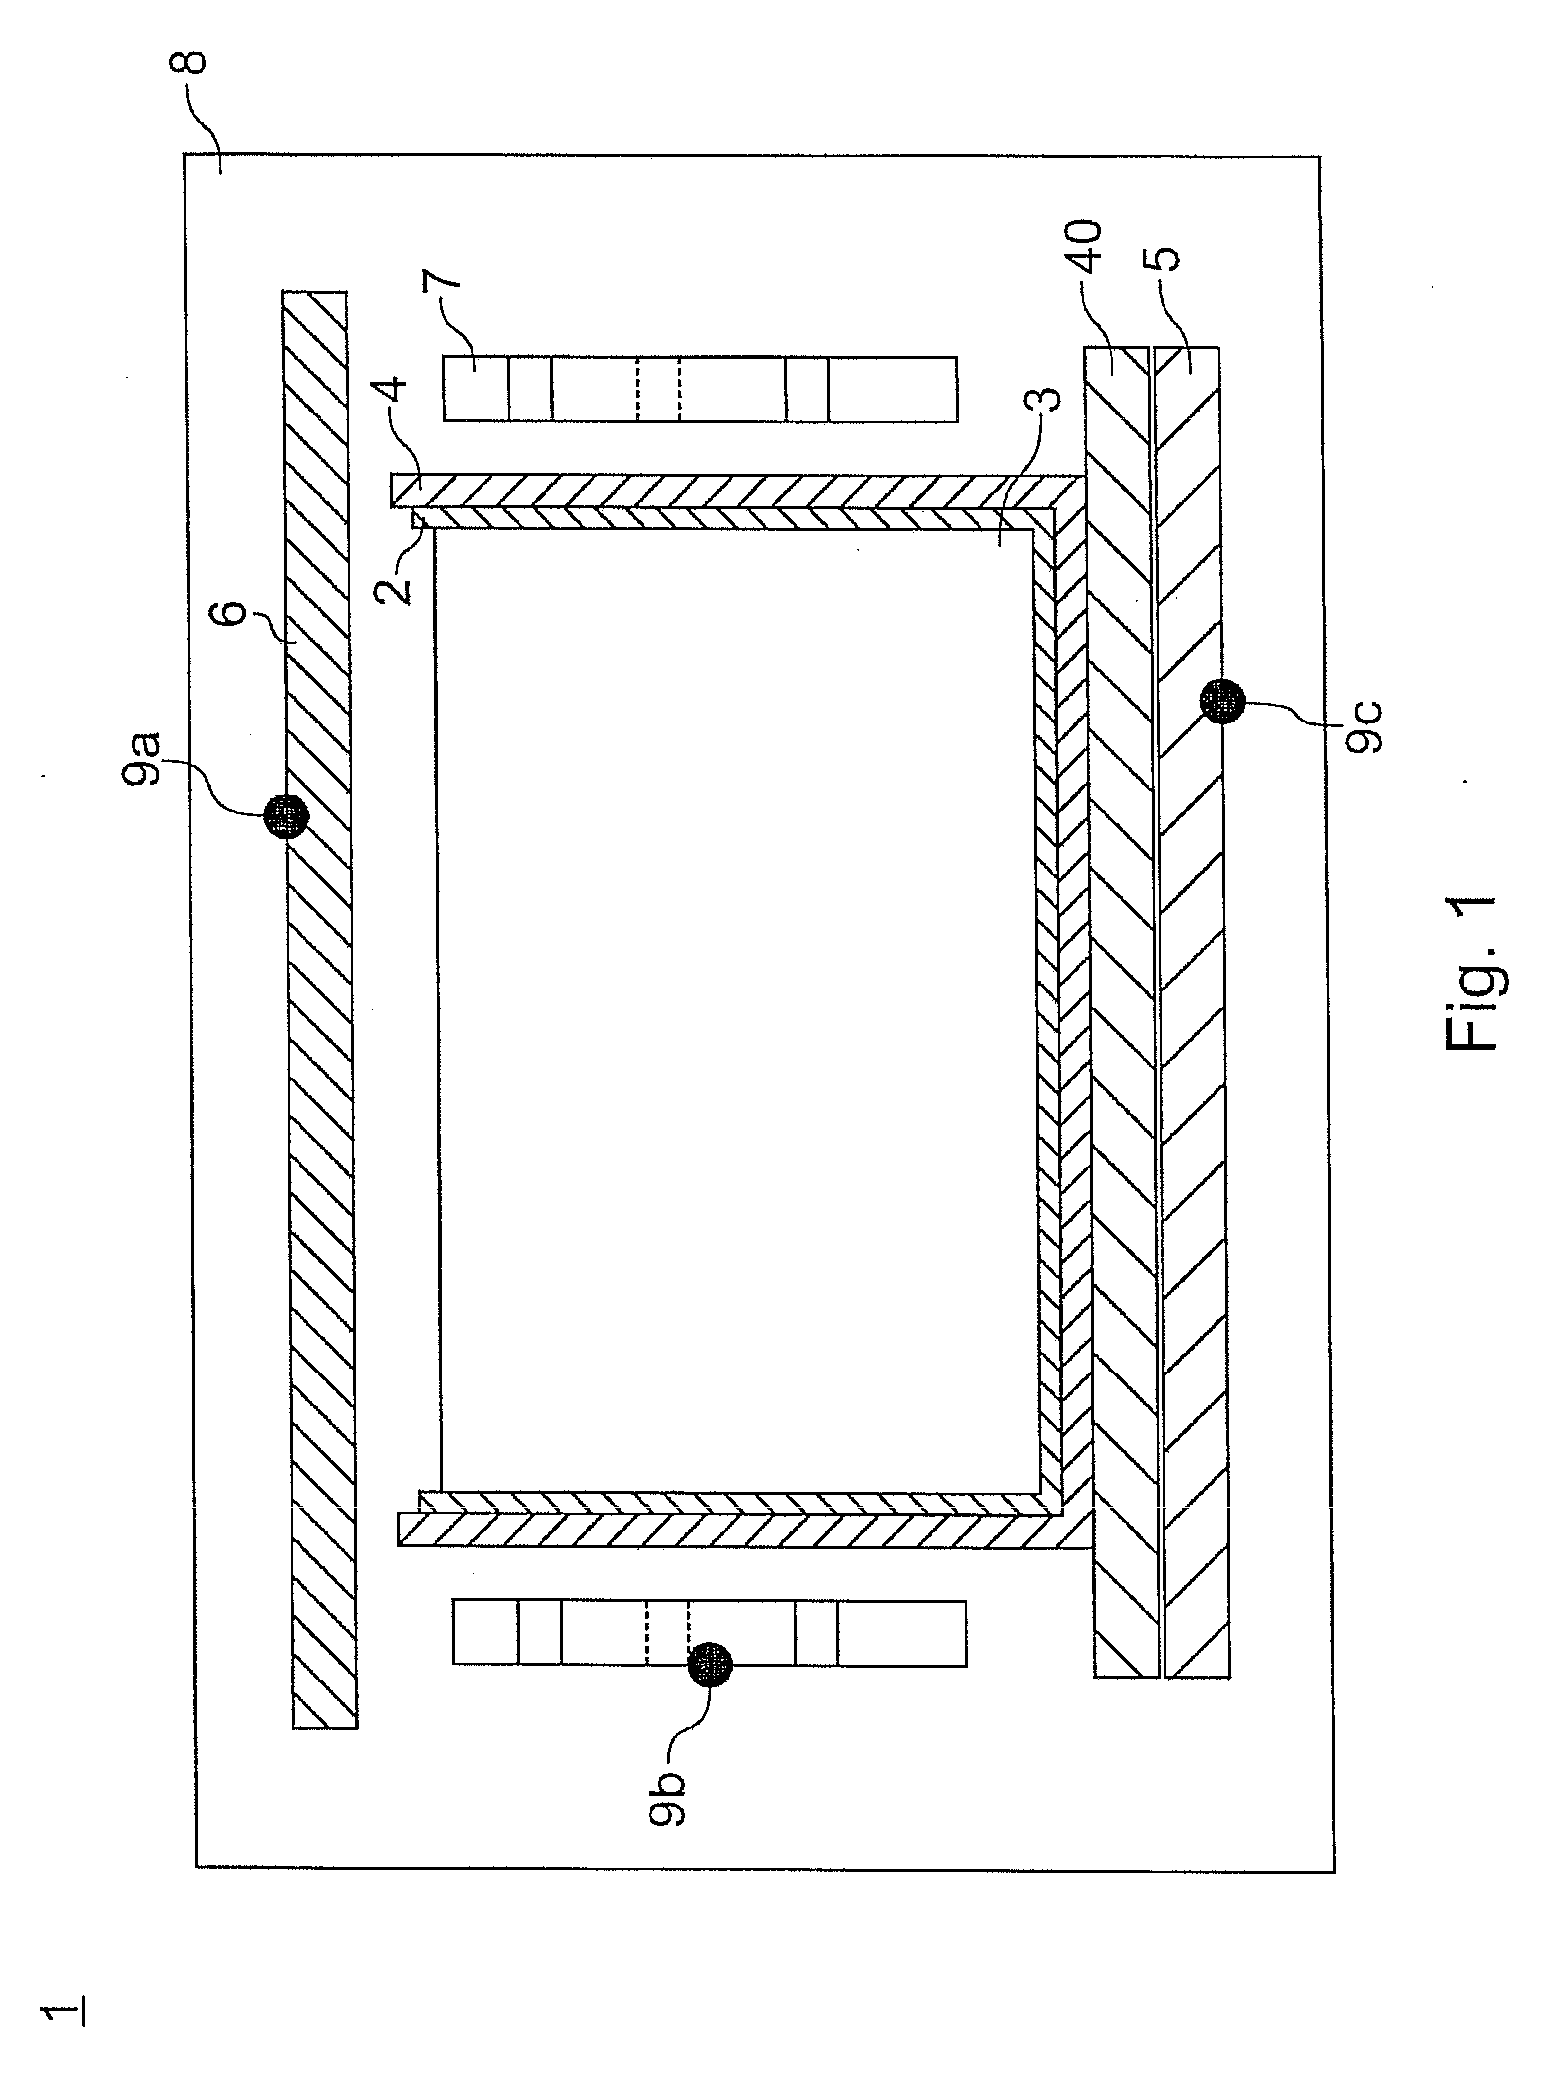 Device and method for the production of monocrystalline or multicrystalline materials, in particular multicrystalline silicon